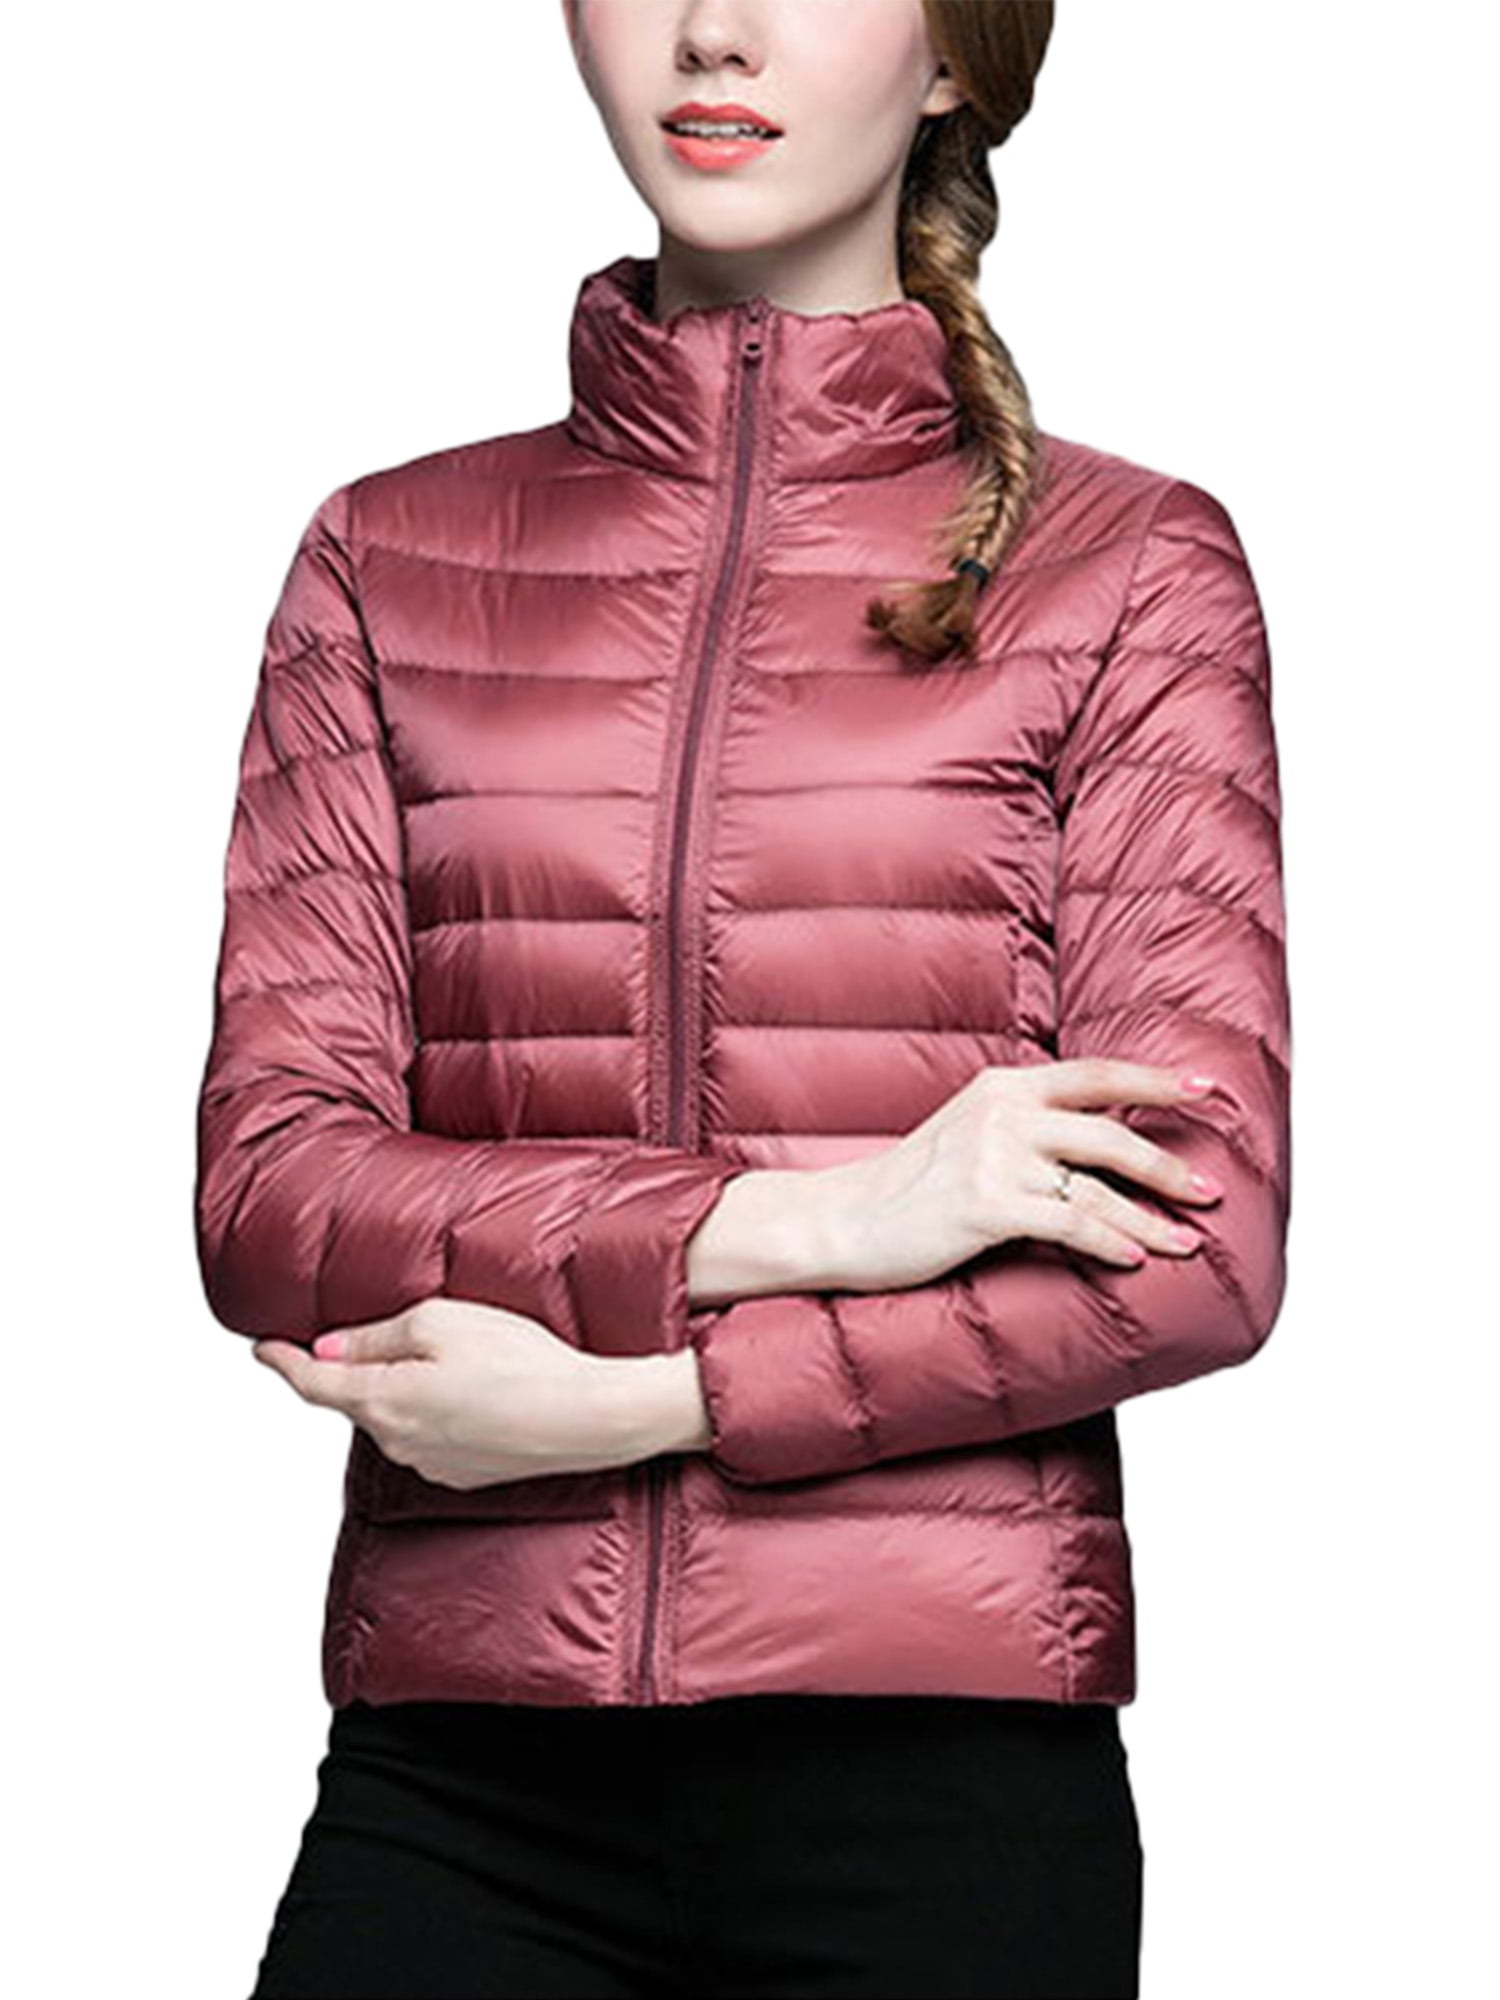 STARBILD Ladies Packable Down Jackets with Hood Ultralight Puffer Coat Hooded Down Jackets with Carry-on Bag 90% Duck Down Filling.